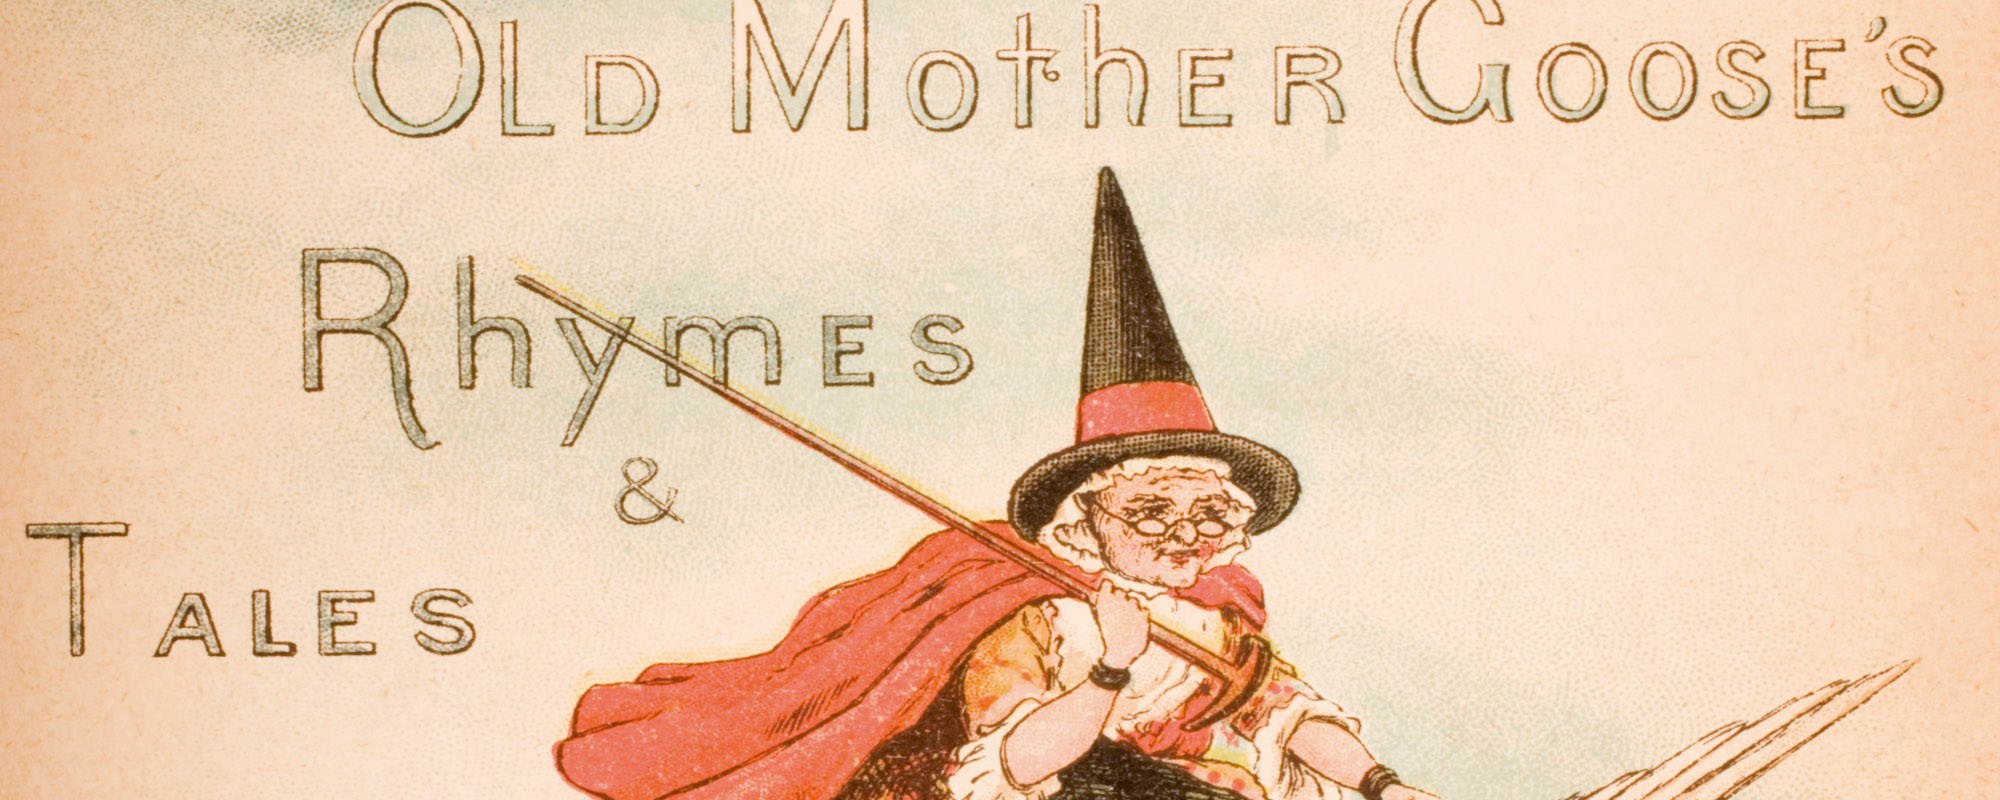 Who Was Mother Goose Really? And What is the Meaning Behind Her Story? -  American Songwriter